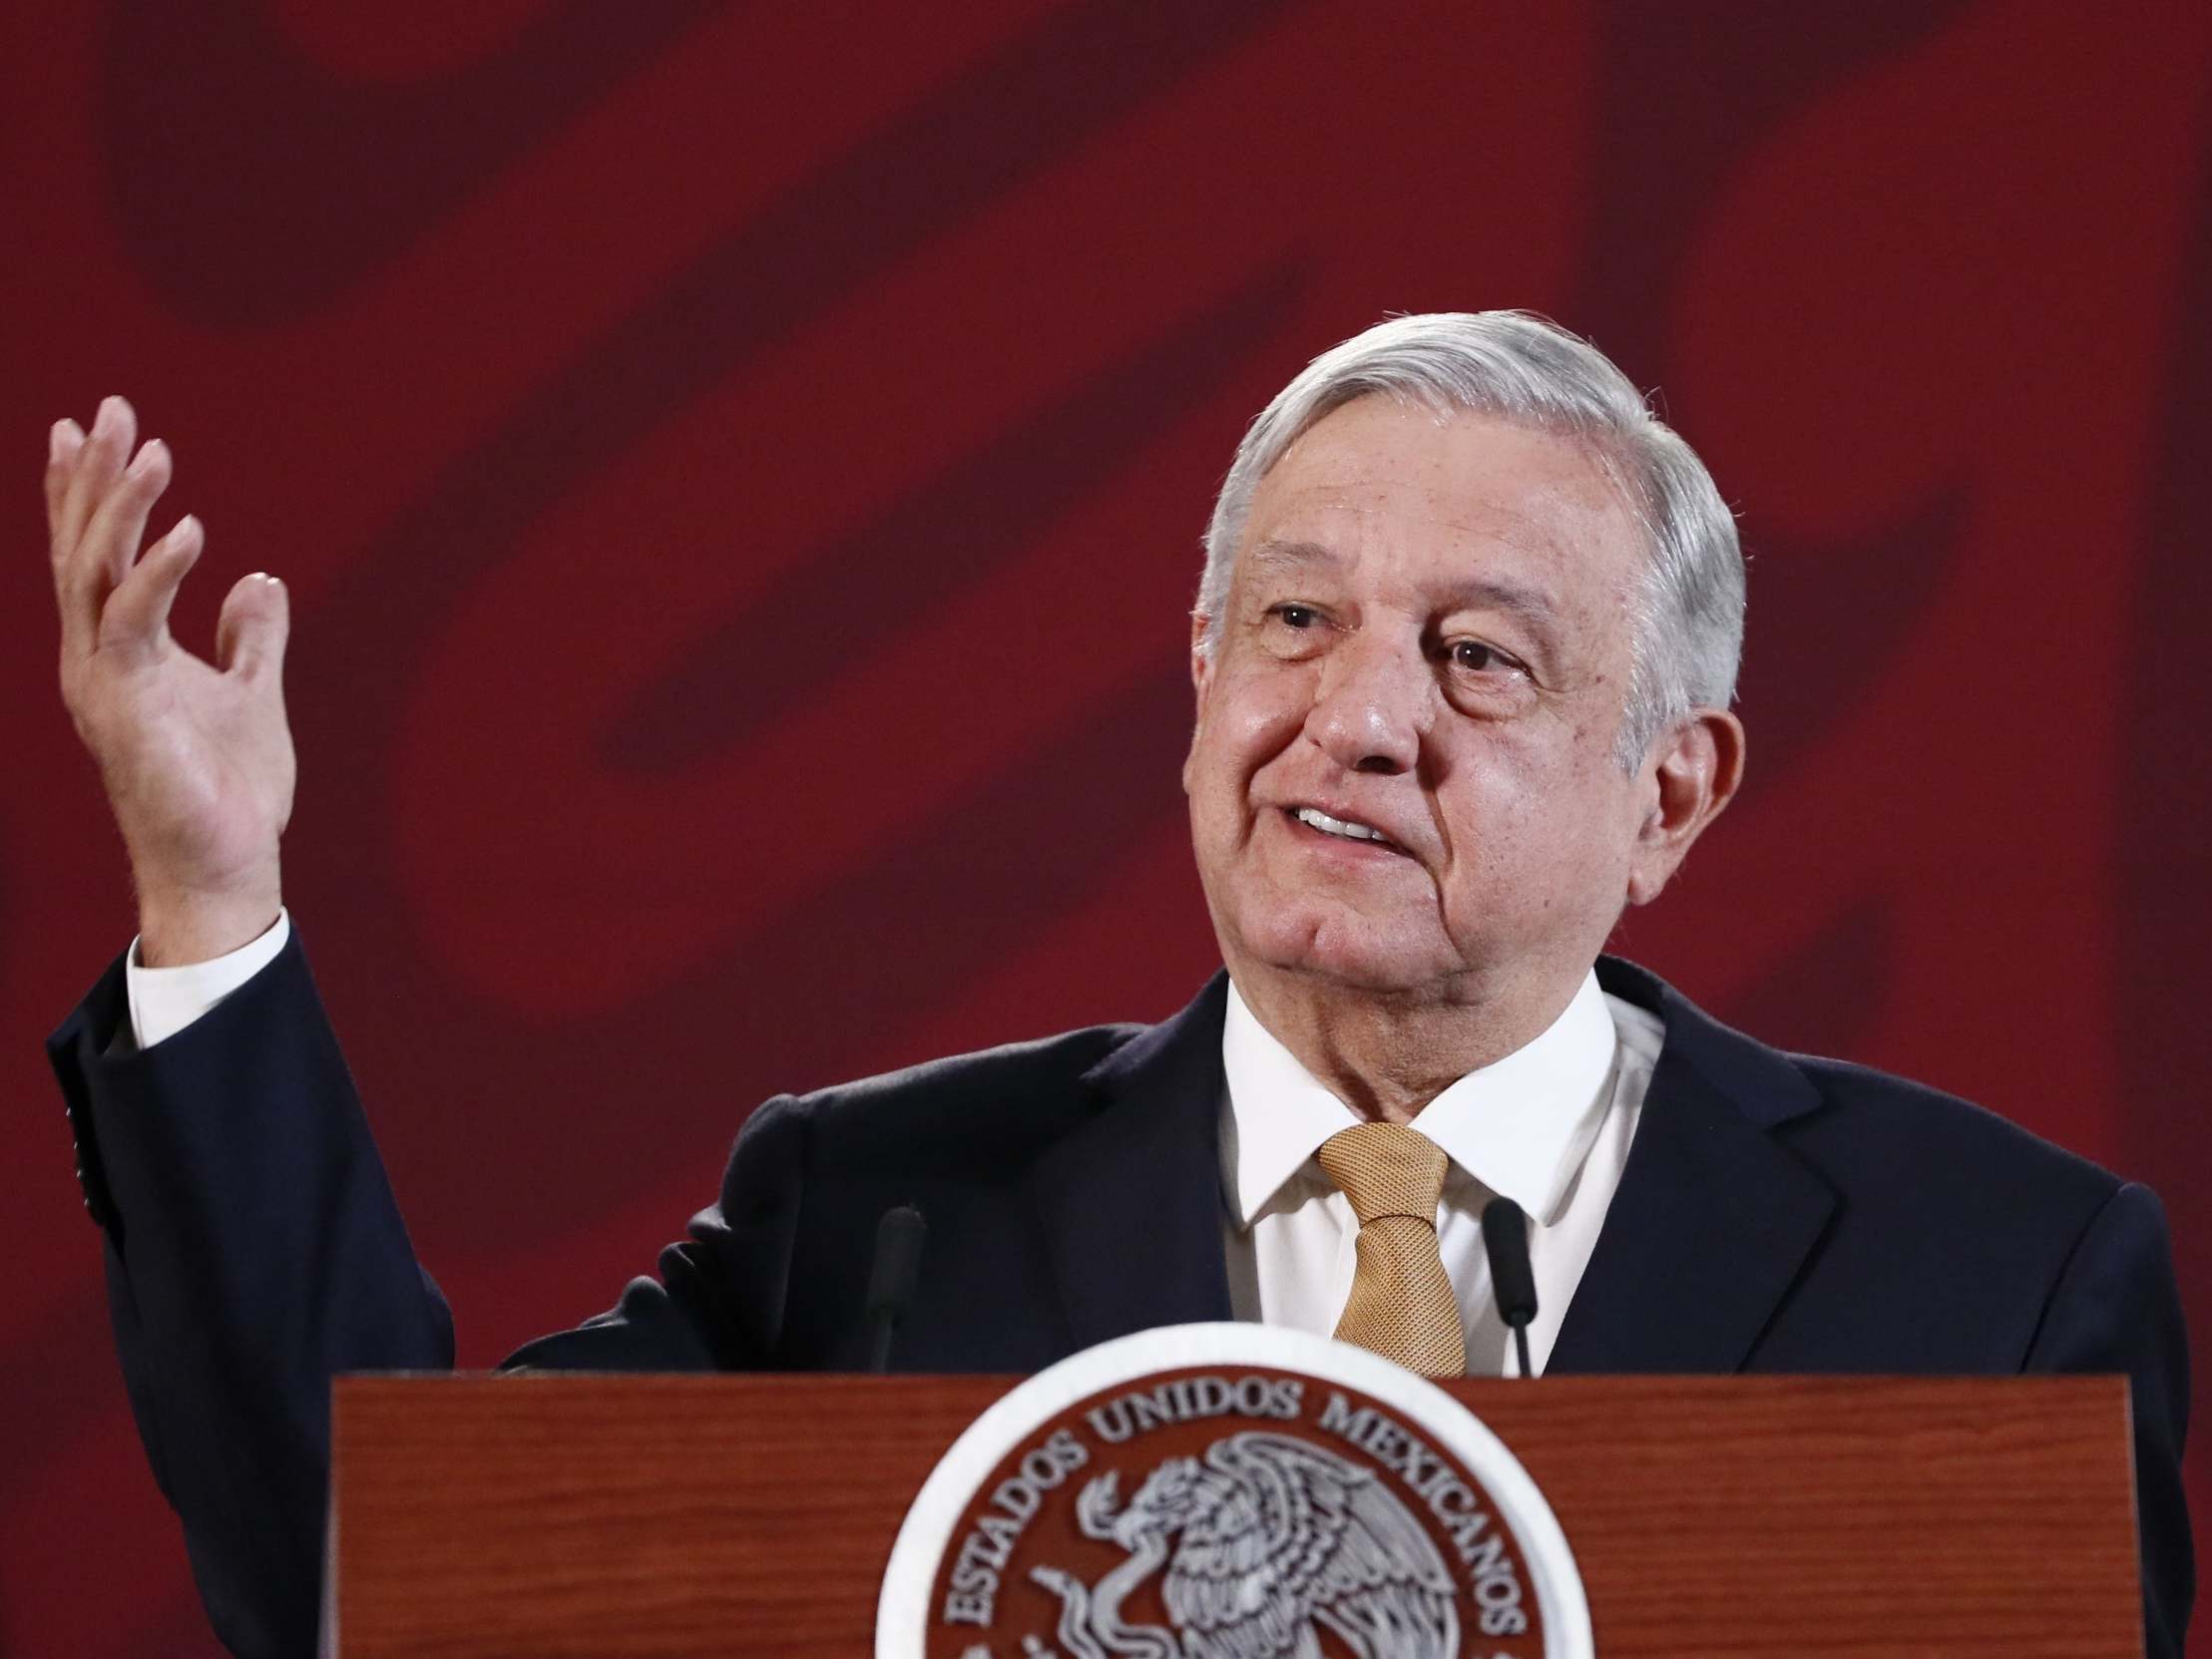 Mexico's president broke his own guidelines on social distancing and caused controversy at the weekend as coronavirus spreads